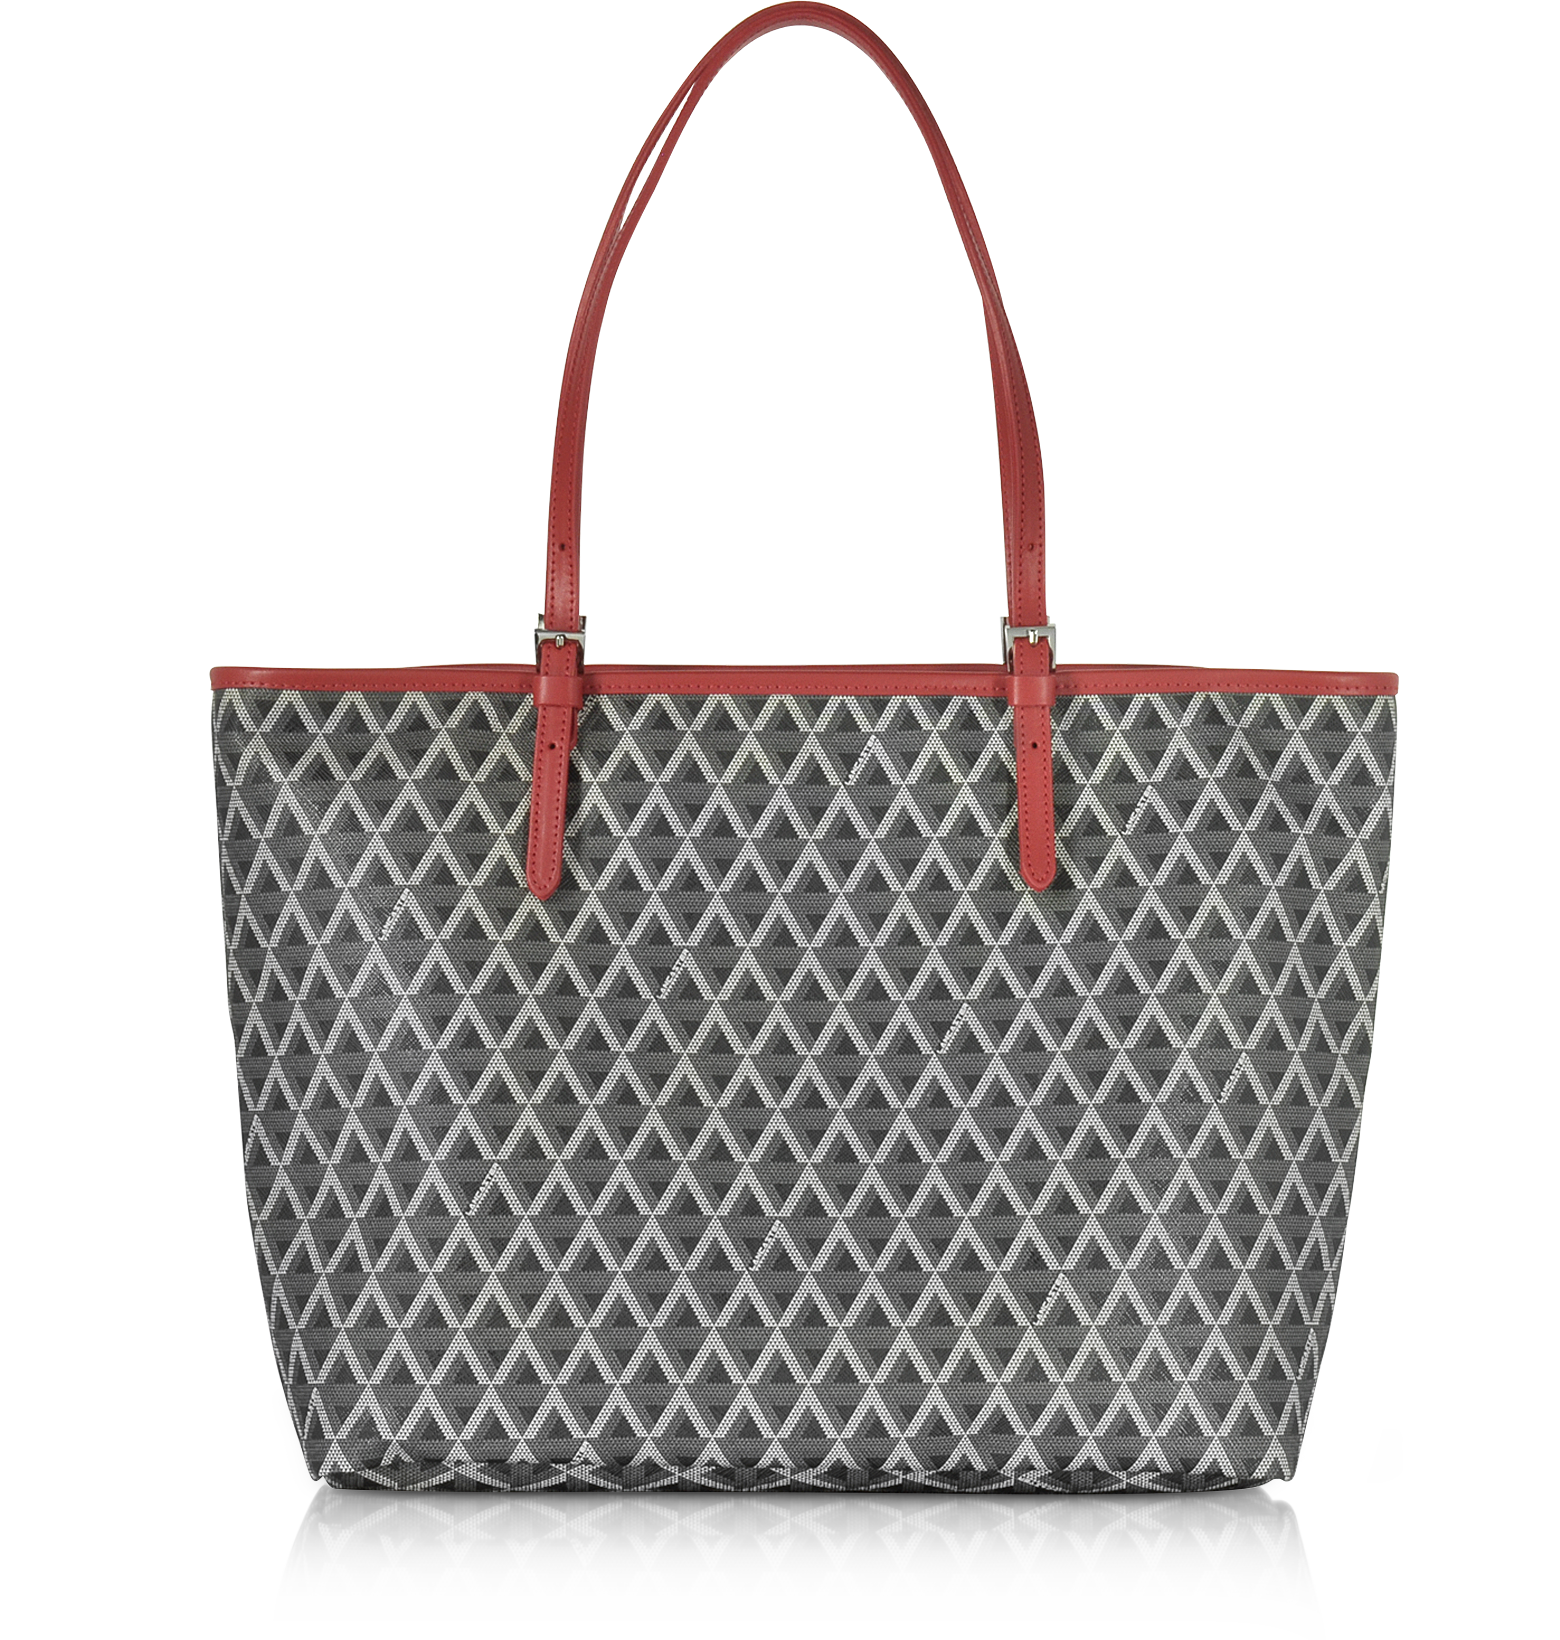 Lancaster Paris Ikon Black & Red Coated Canvas and Leather Tote Bag at FORZIERI